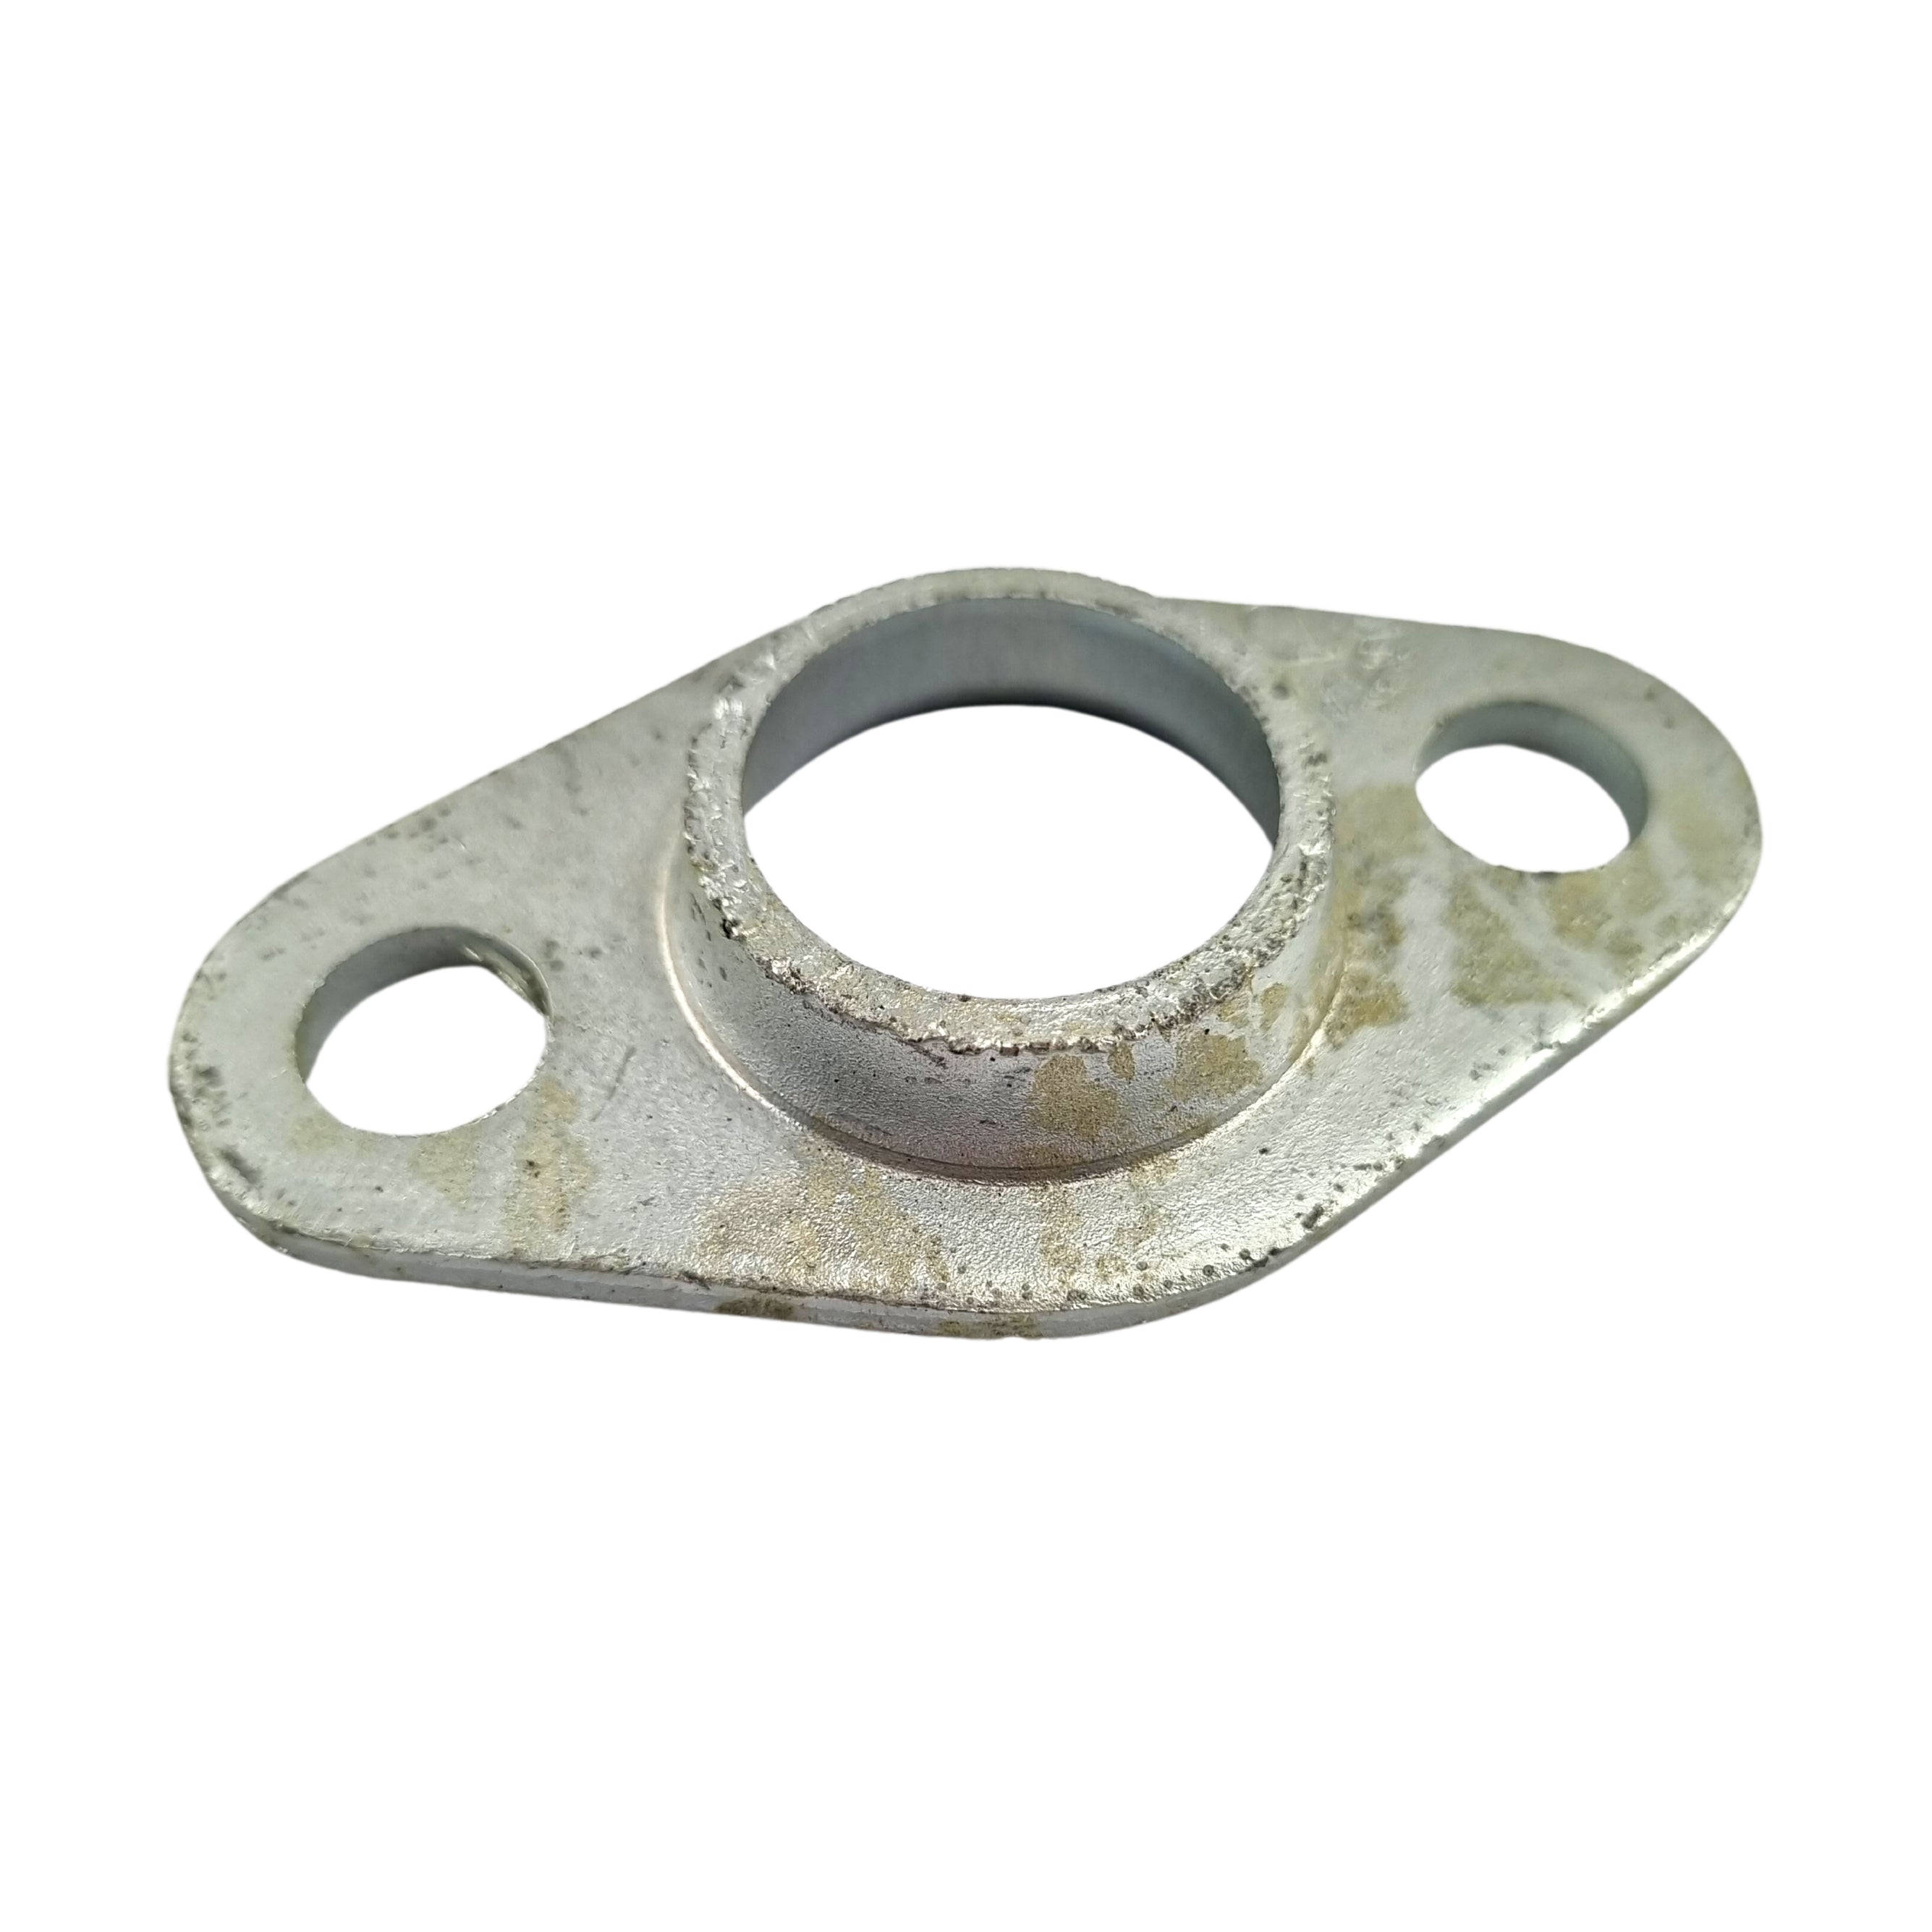 Oval Flange - Galvanised. Australian made. Shop fence & gate fittings online chain.com.au. Australia wide shipping.